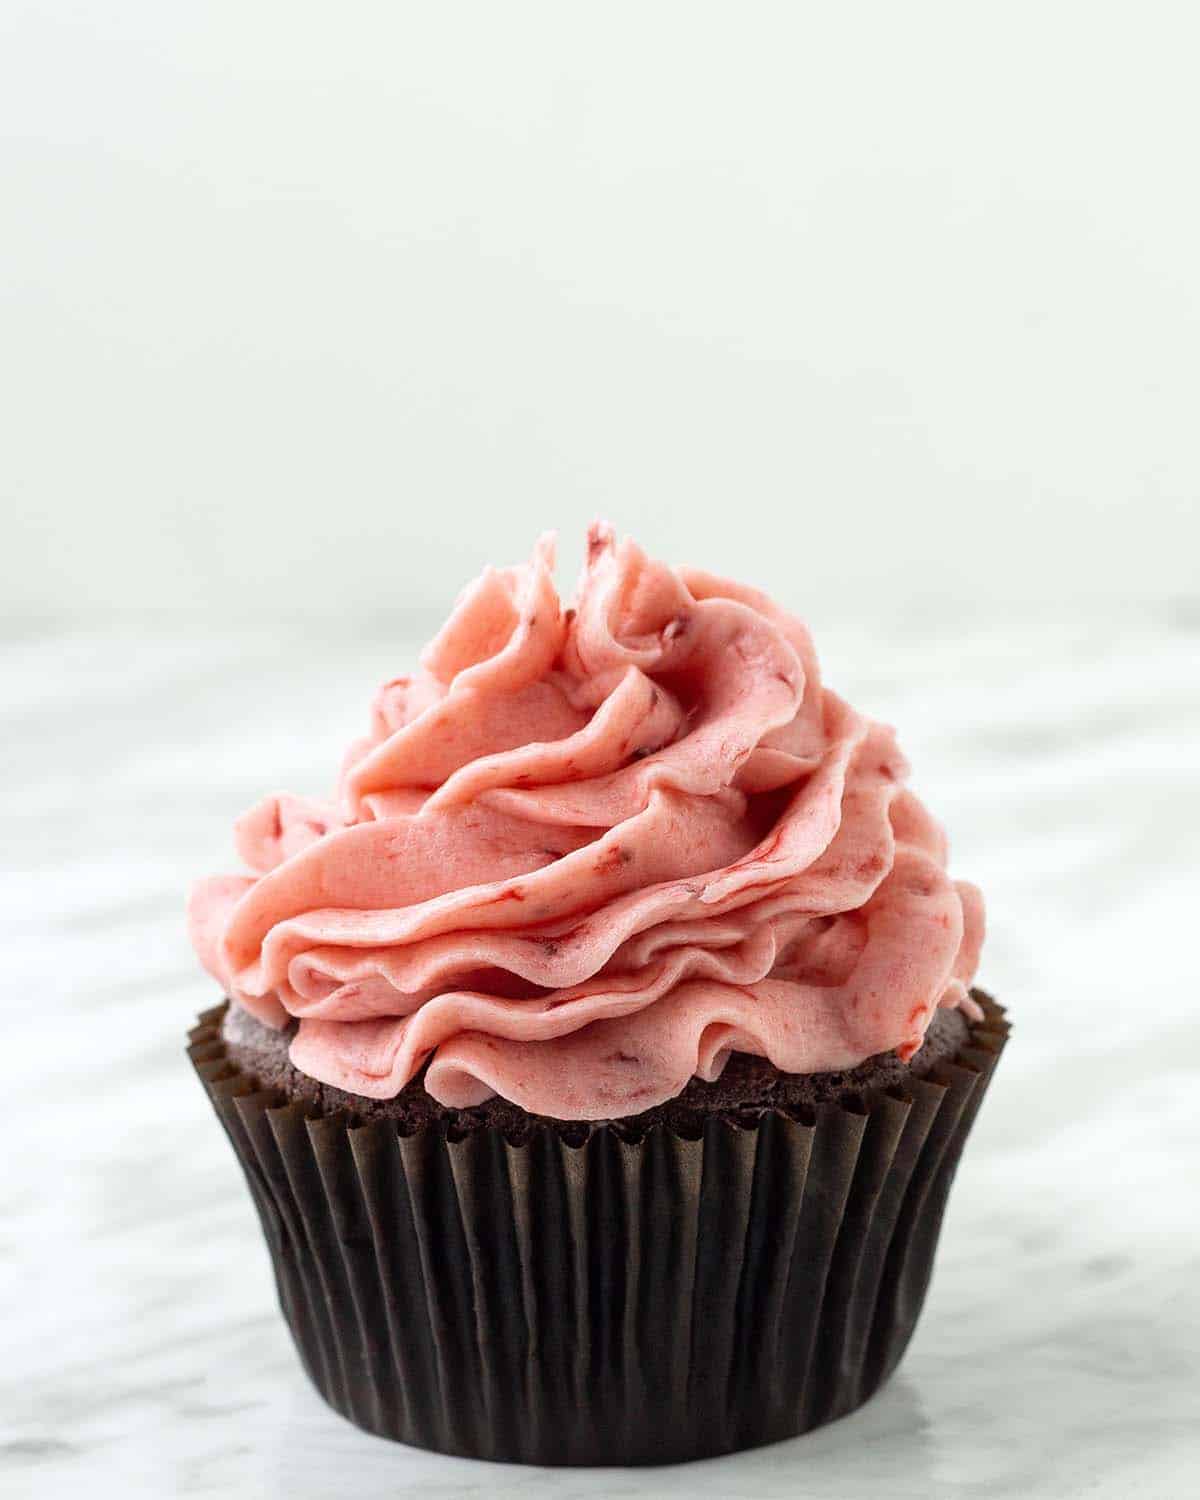 A chocolate cupcake topped with vegan strawberry frosting that was made with fresh strawberries.